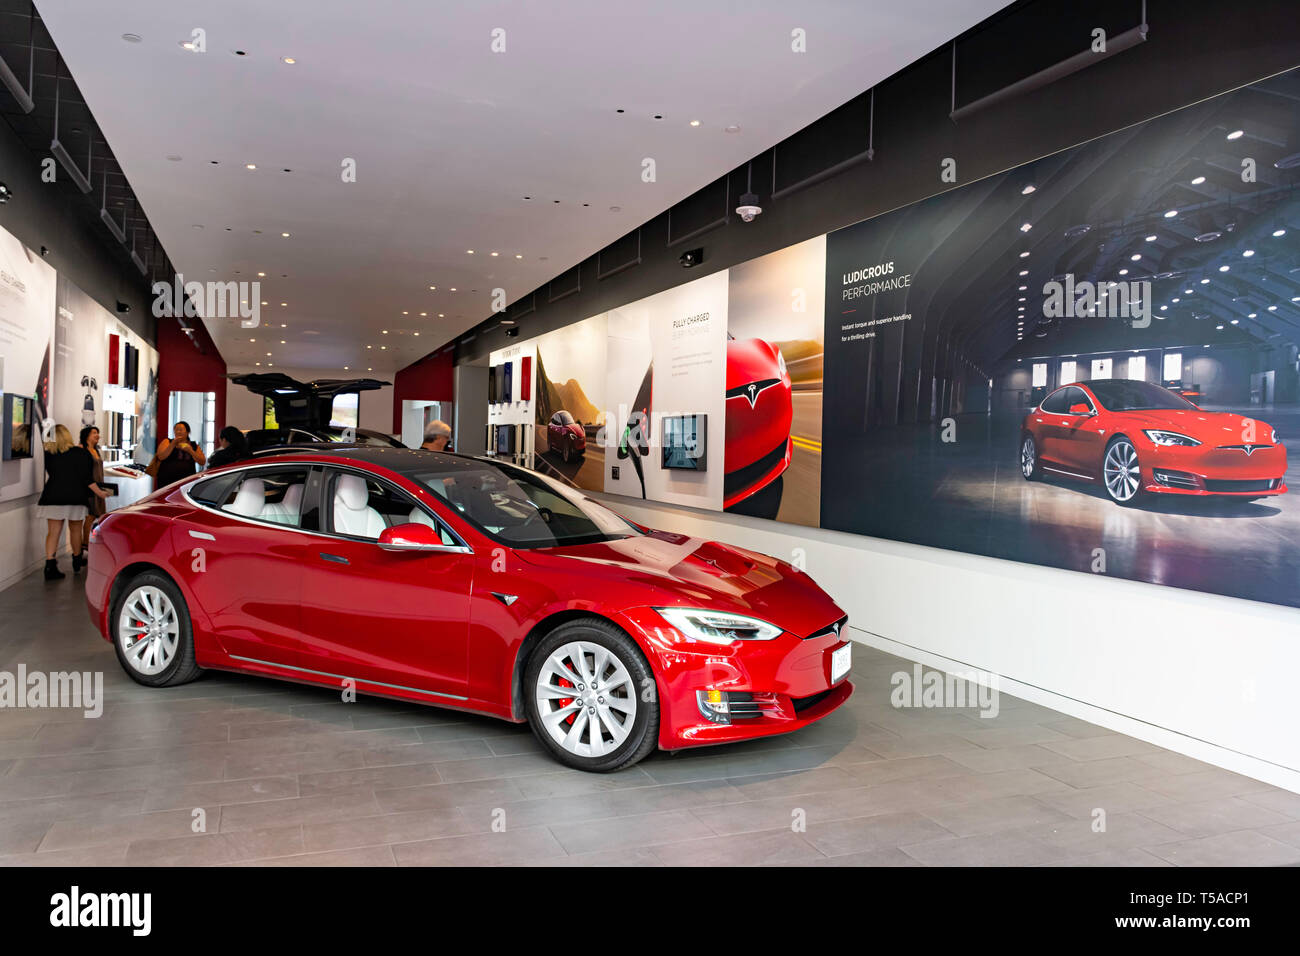 HONOLULU HAWAII USA - APRIL 2, 2019: Tesla Motors showroom with the Tesla Model S in the foreground. Tesla Motors is an industry leading designer and  Stock Photo